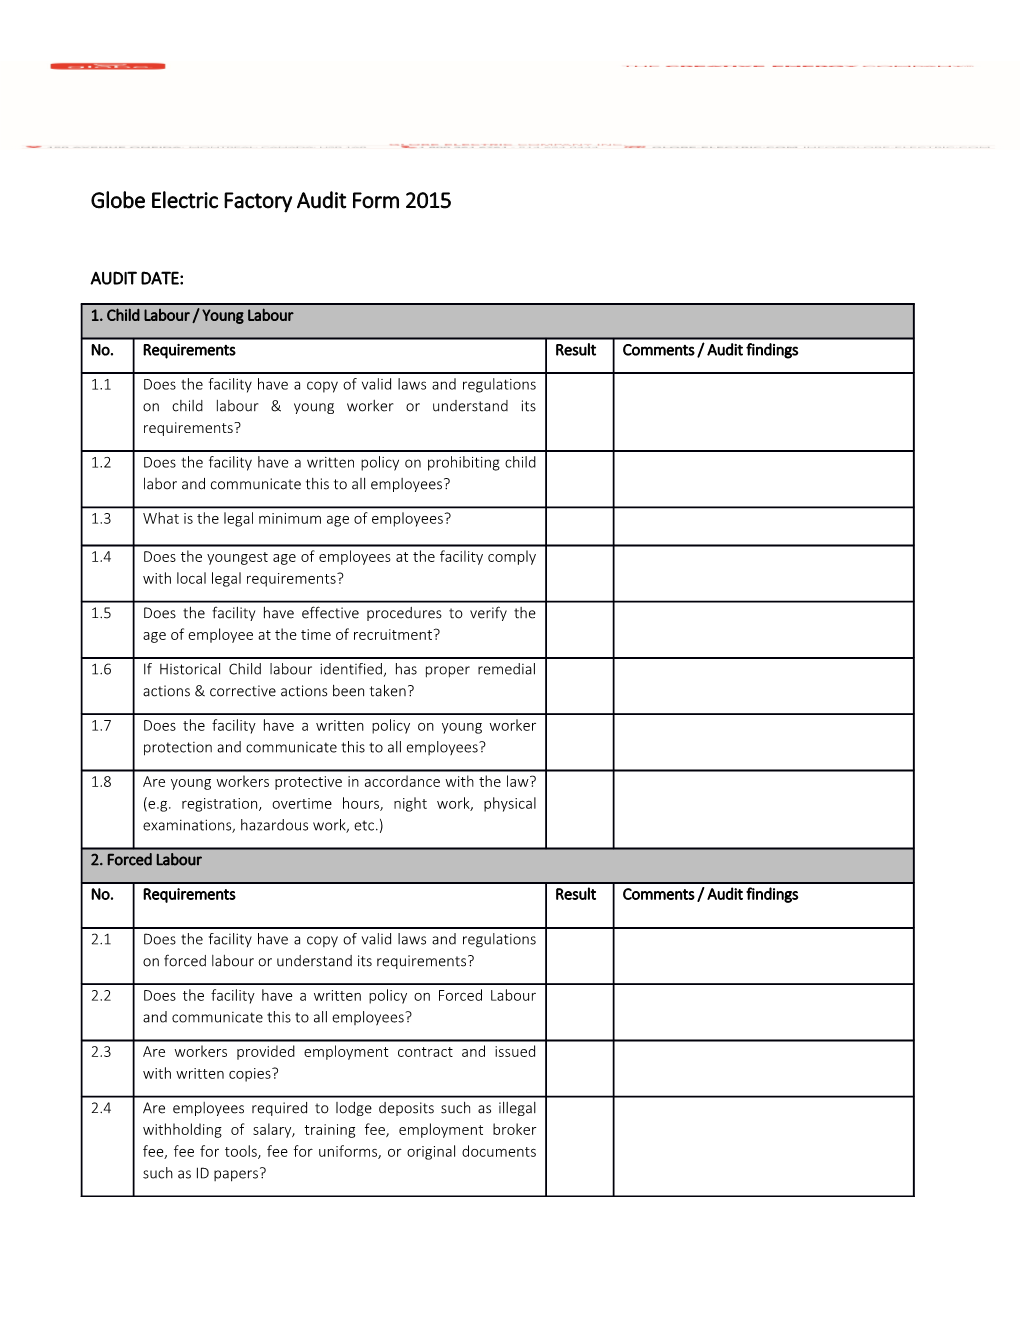 Globe Electric Factory Audit Form 2015